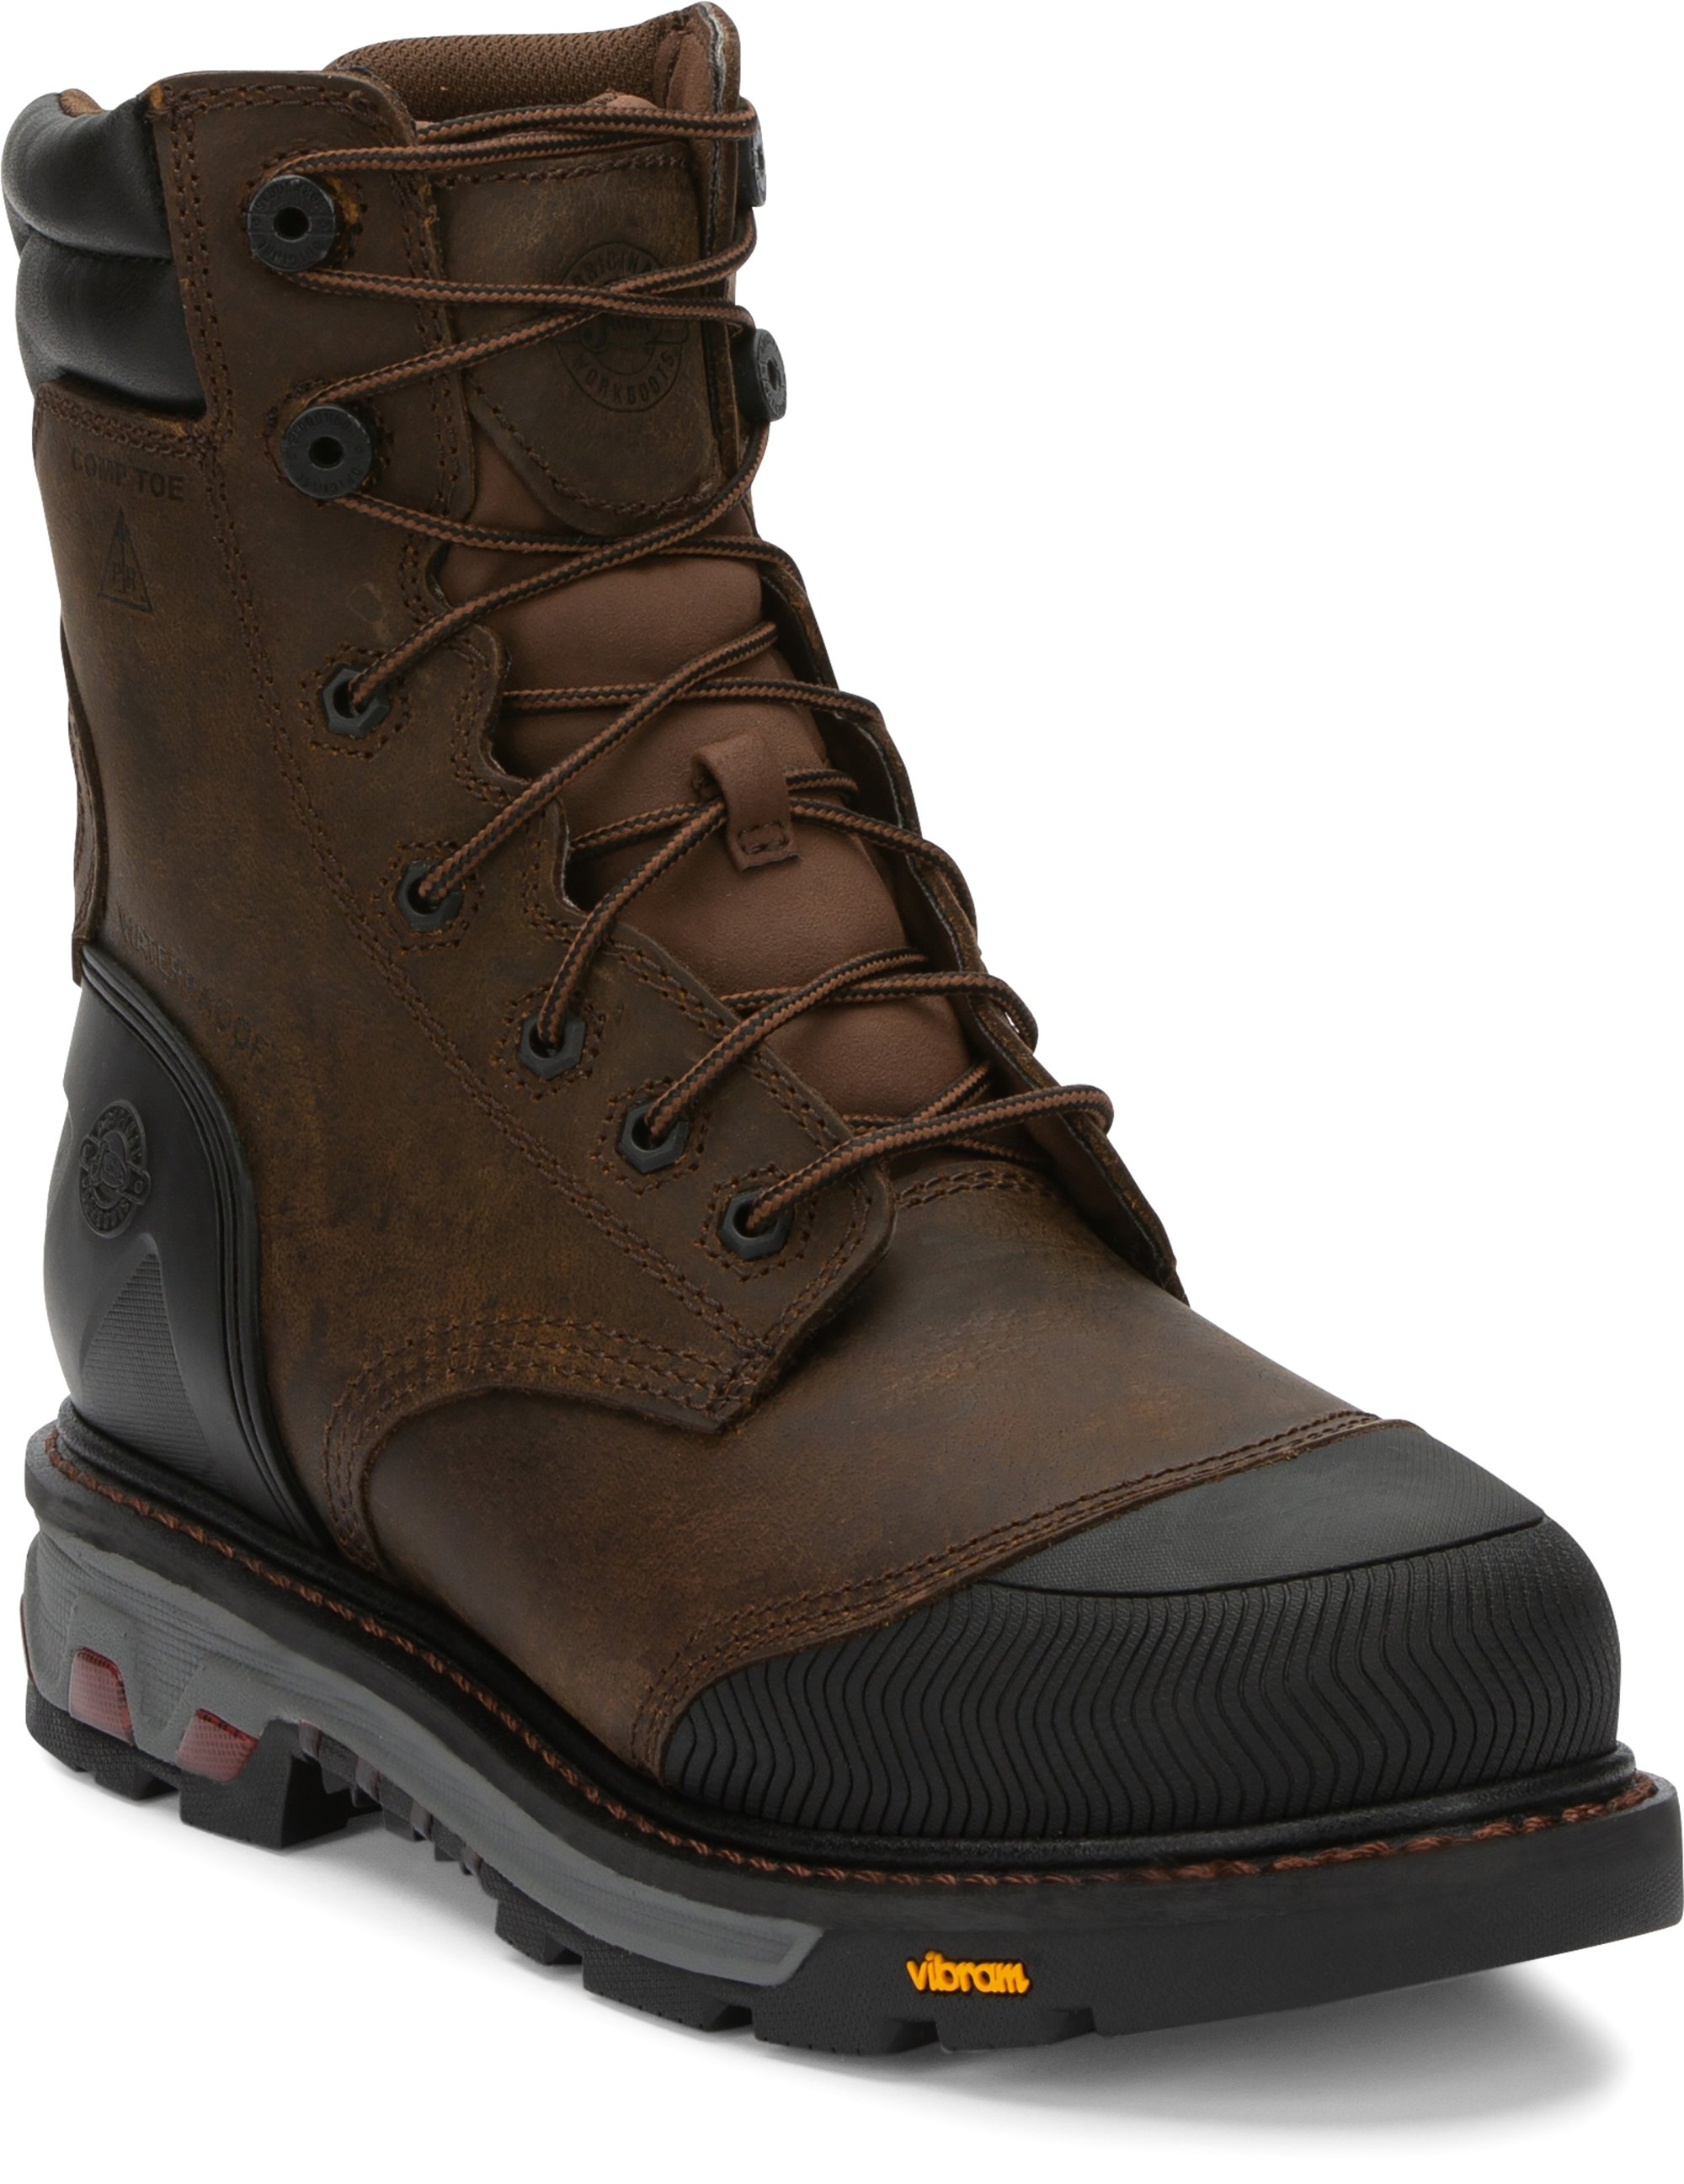 justin insulated work boots